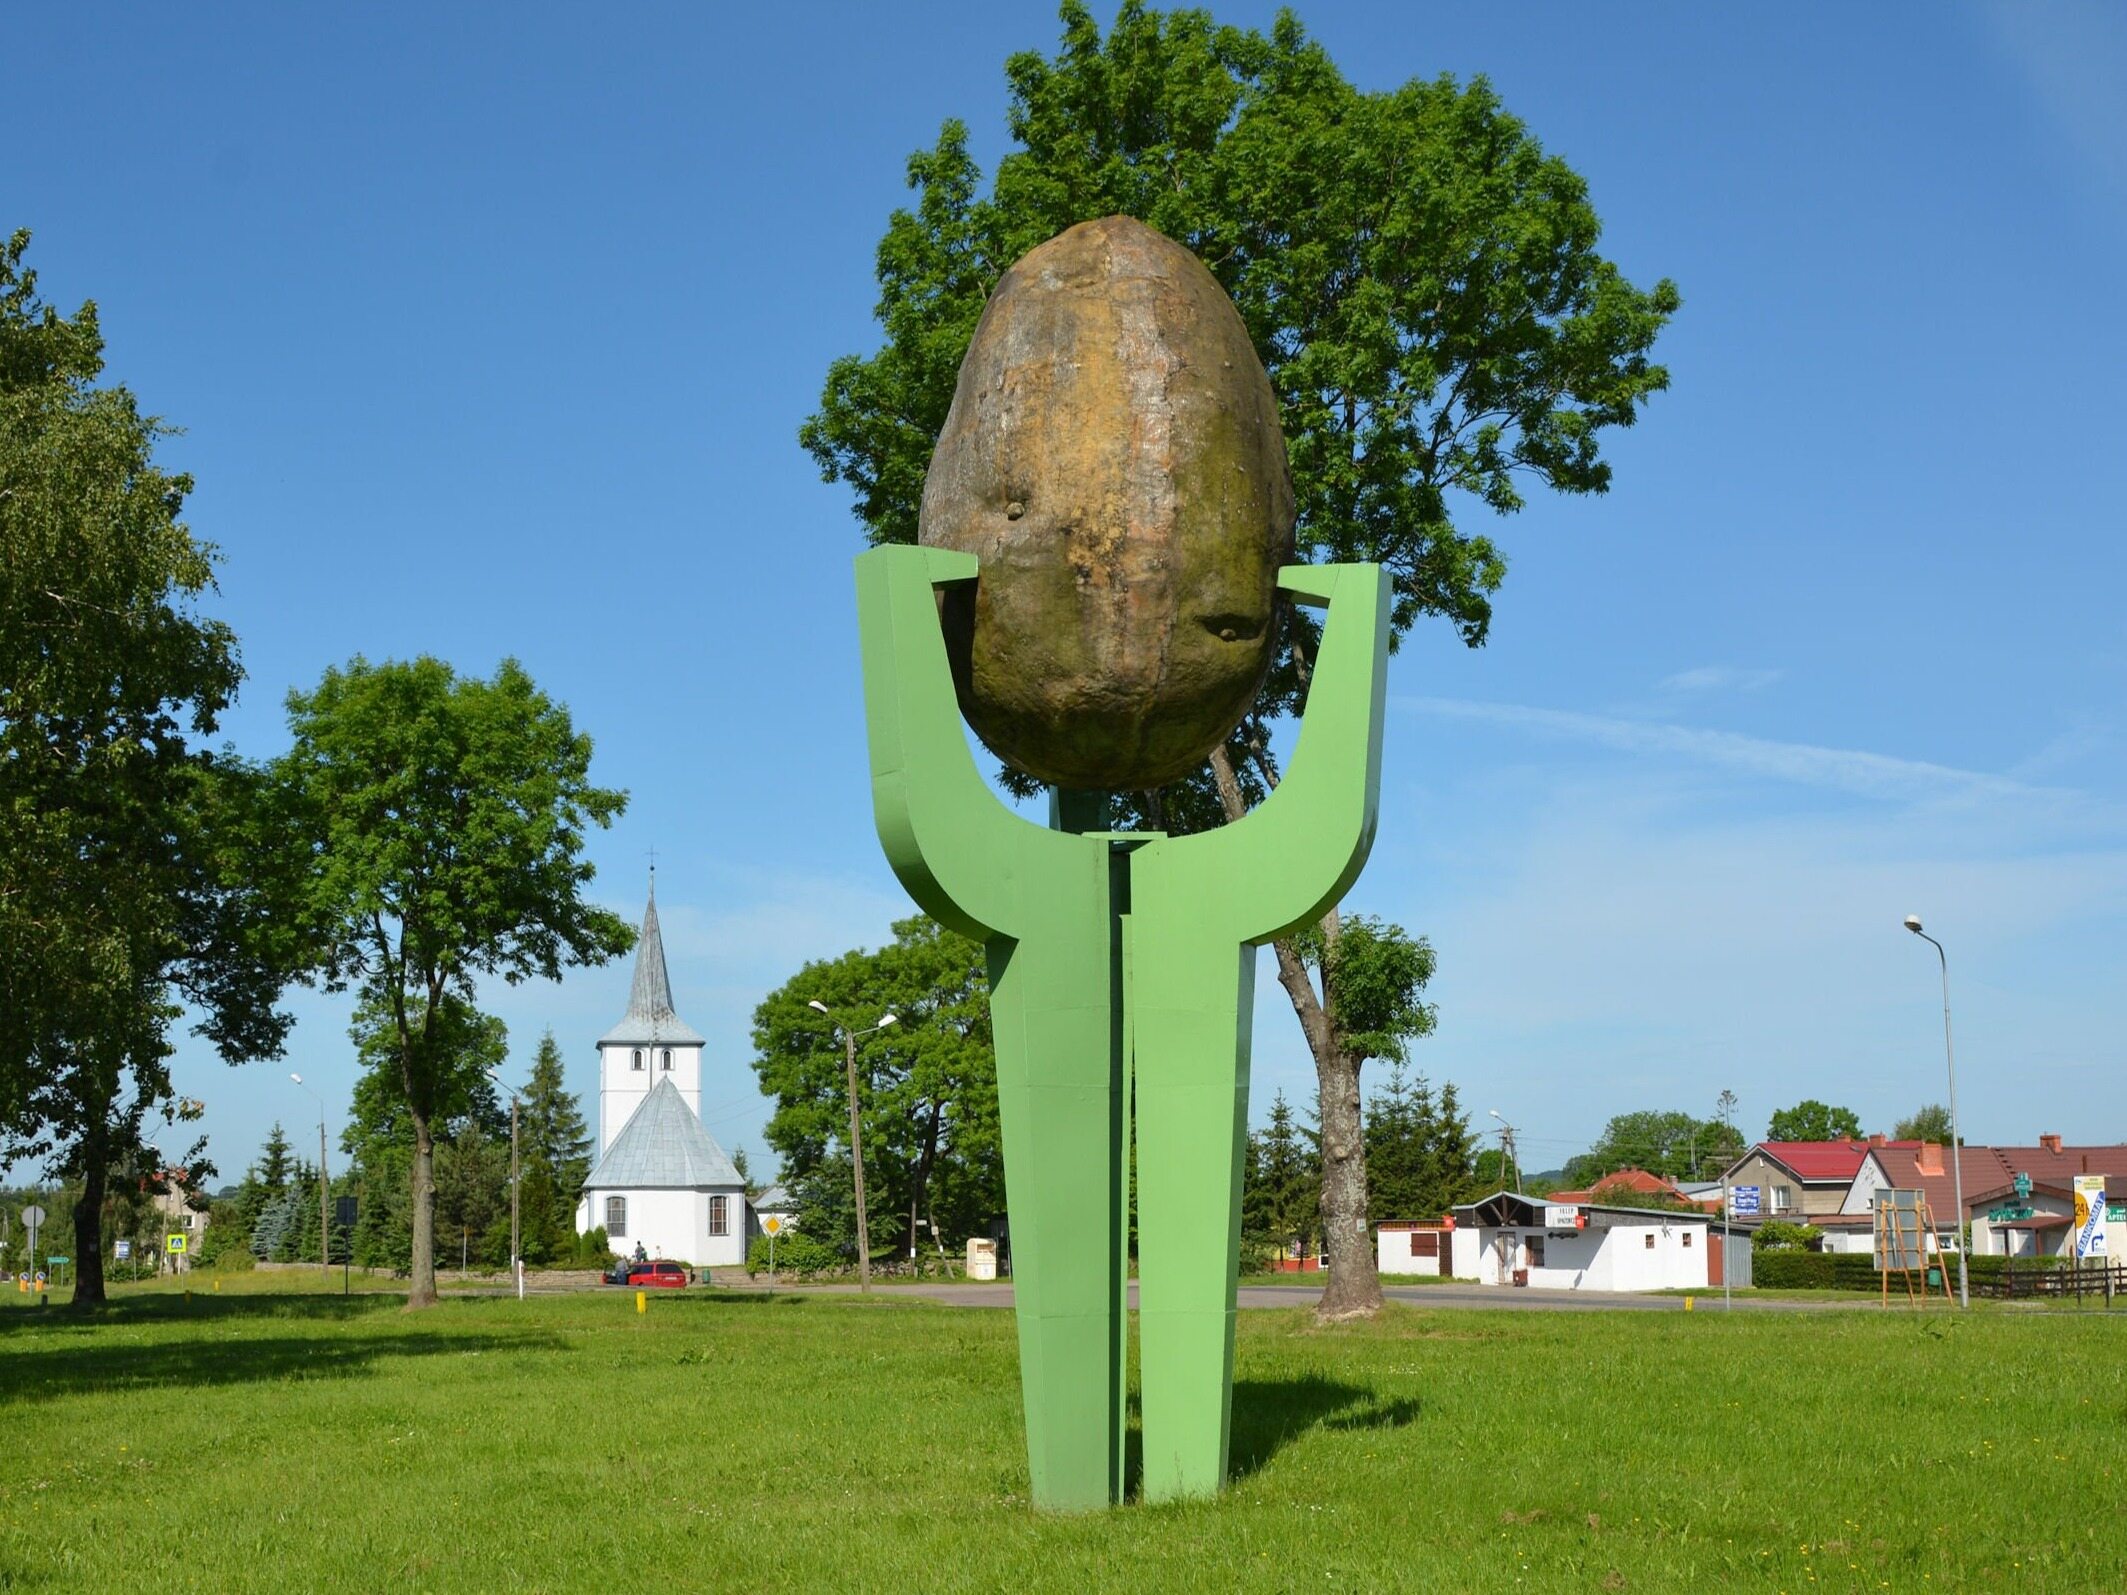 The Polish capital of potatoes.  The largest monument of this vegetable in the world stands here